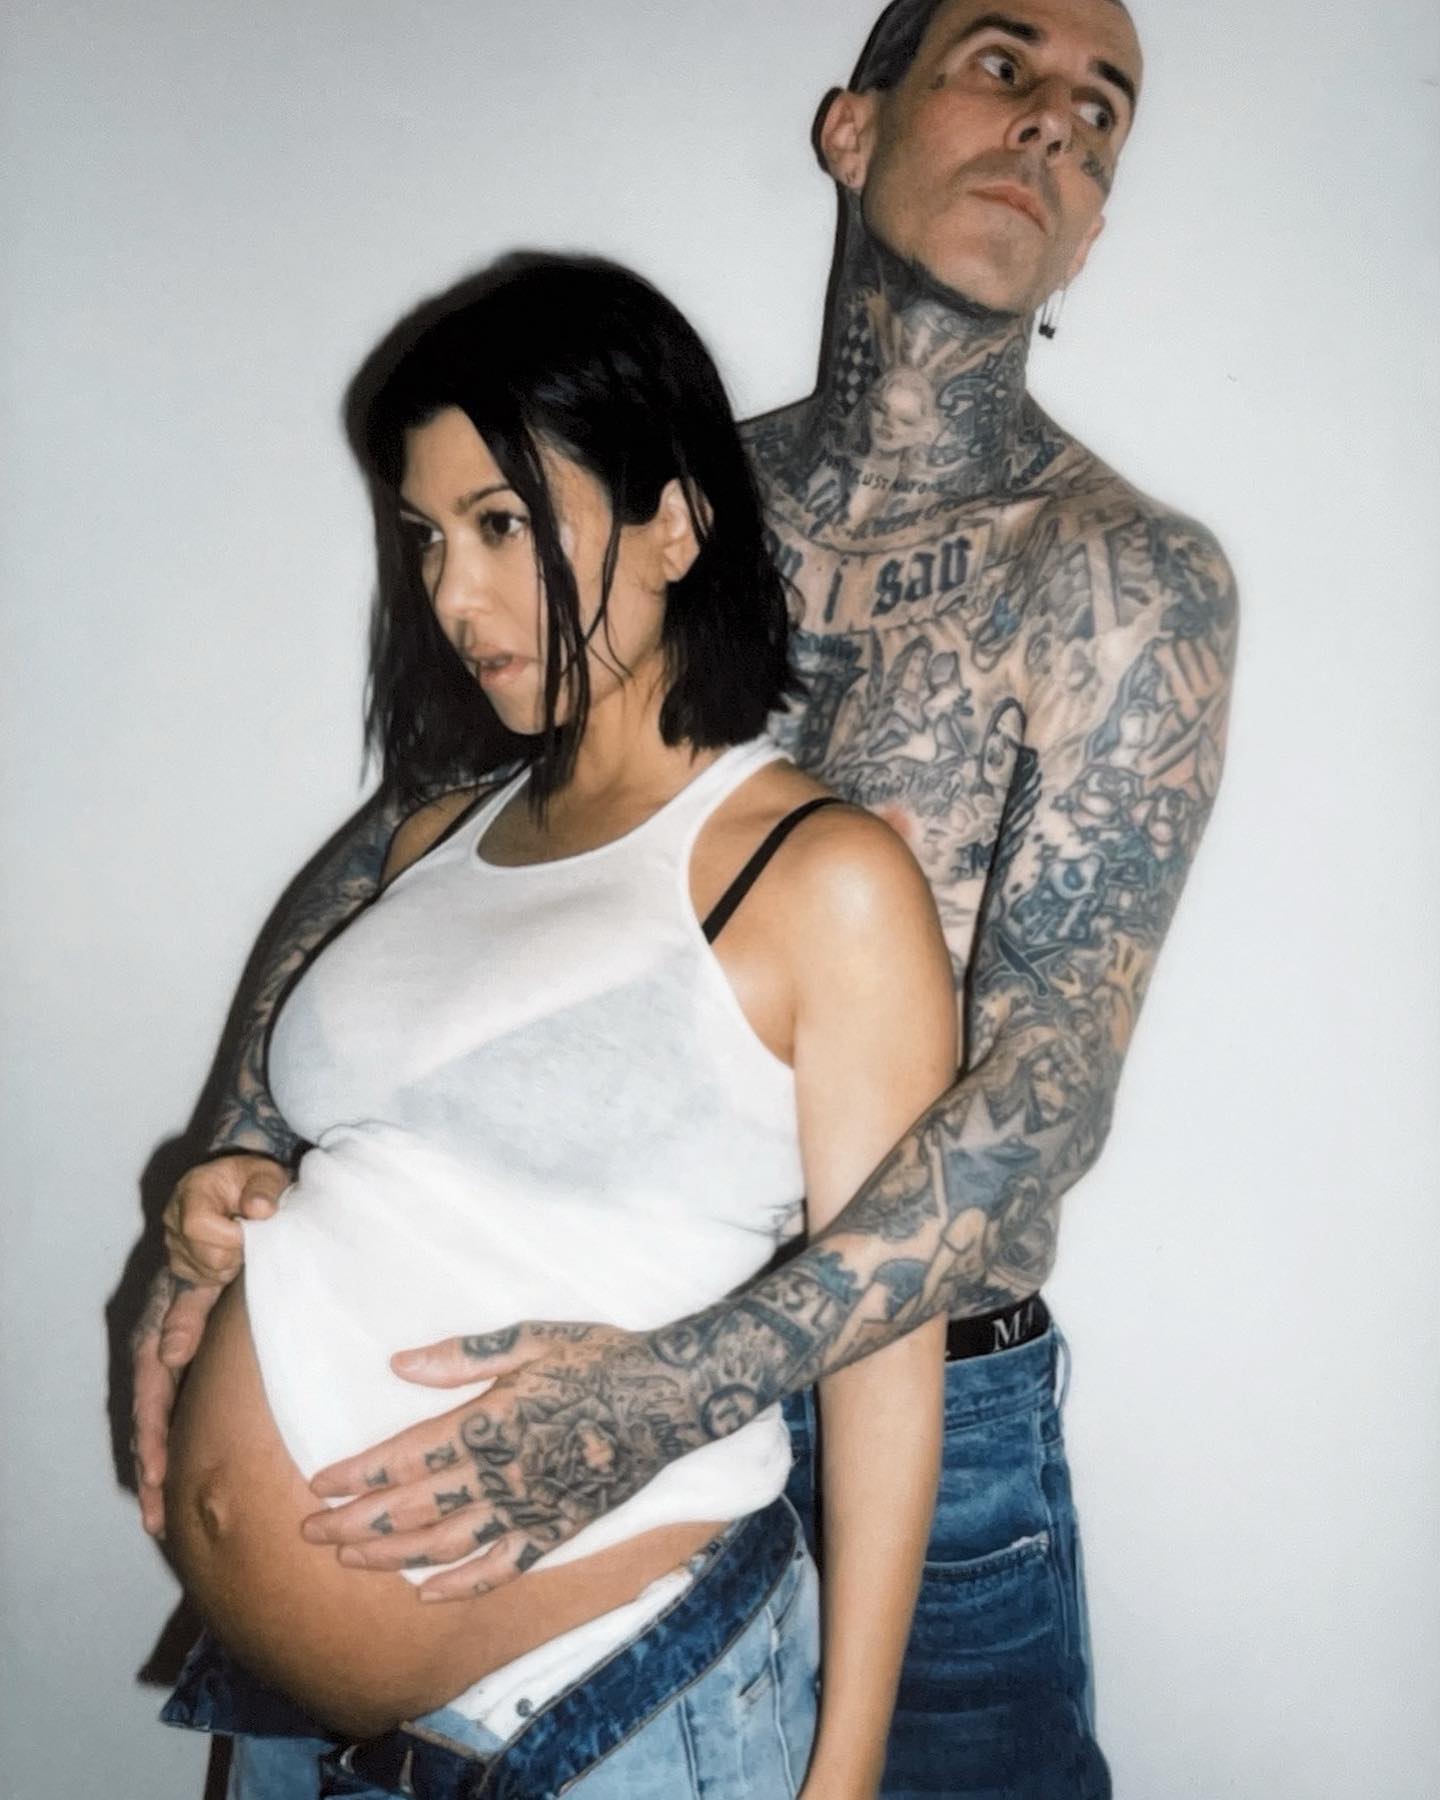 Kourtney has been staying out of the public eye since she gave birth to her and husband Travis Barker's first child together